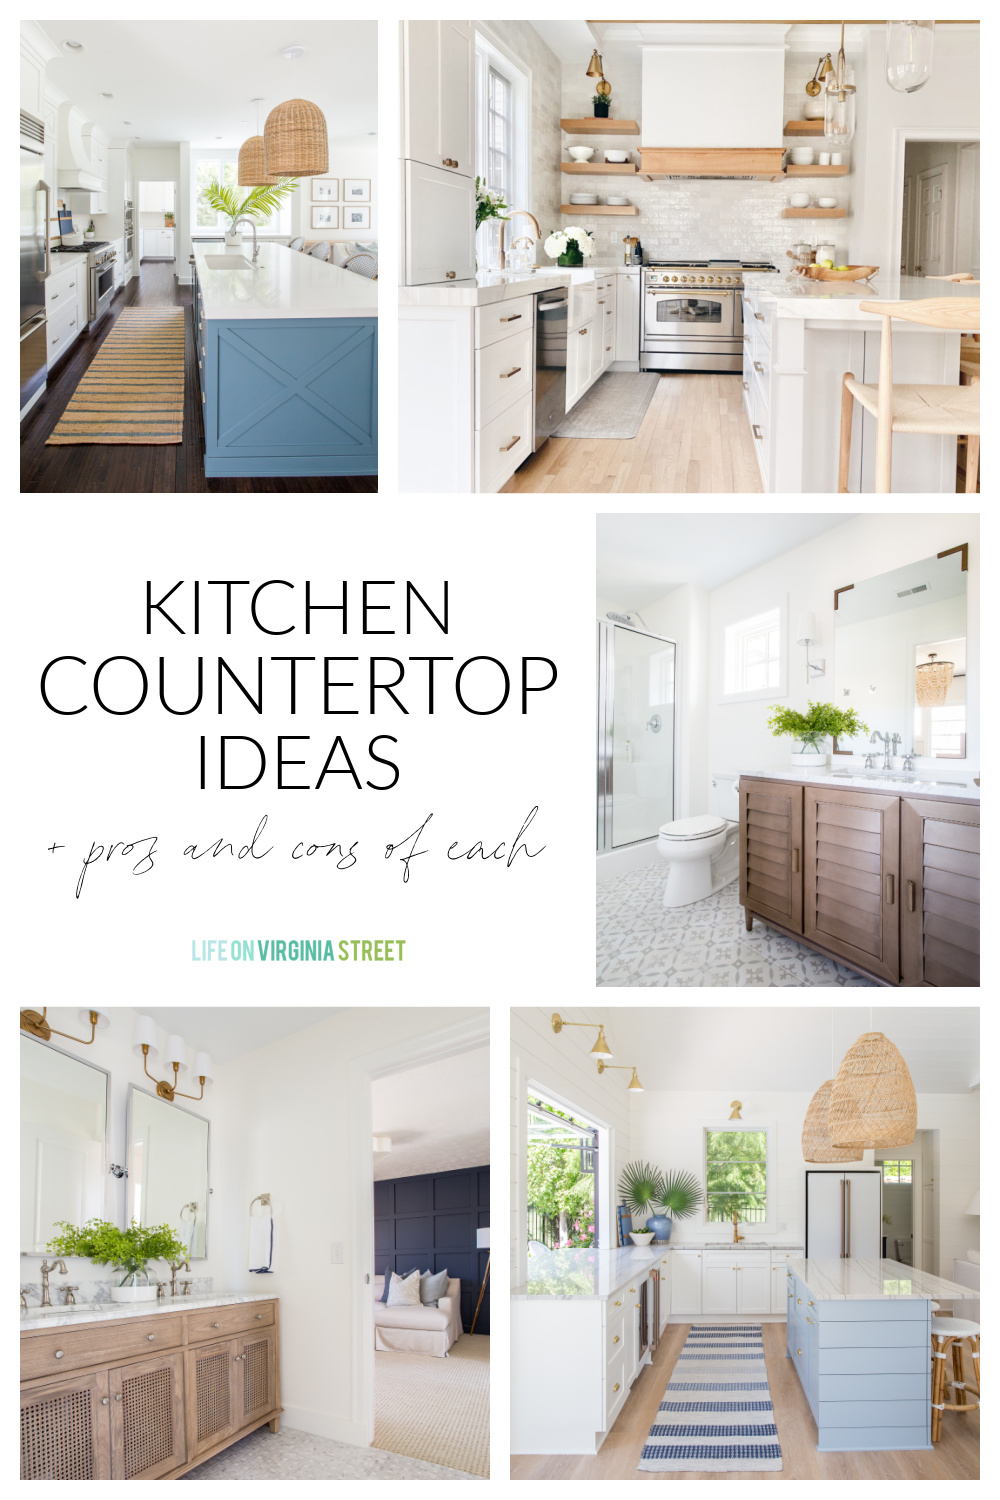 WHY YOUR COUNTERTOPS ARE THE MOST IMPORTANT PART OF YOUR KITCHEN • Bella  Casa Countertops and Stone